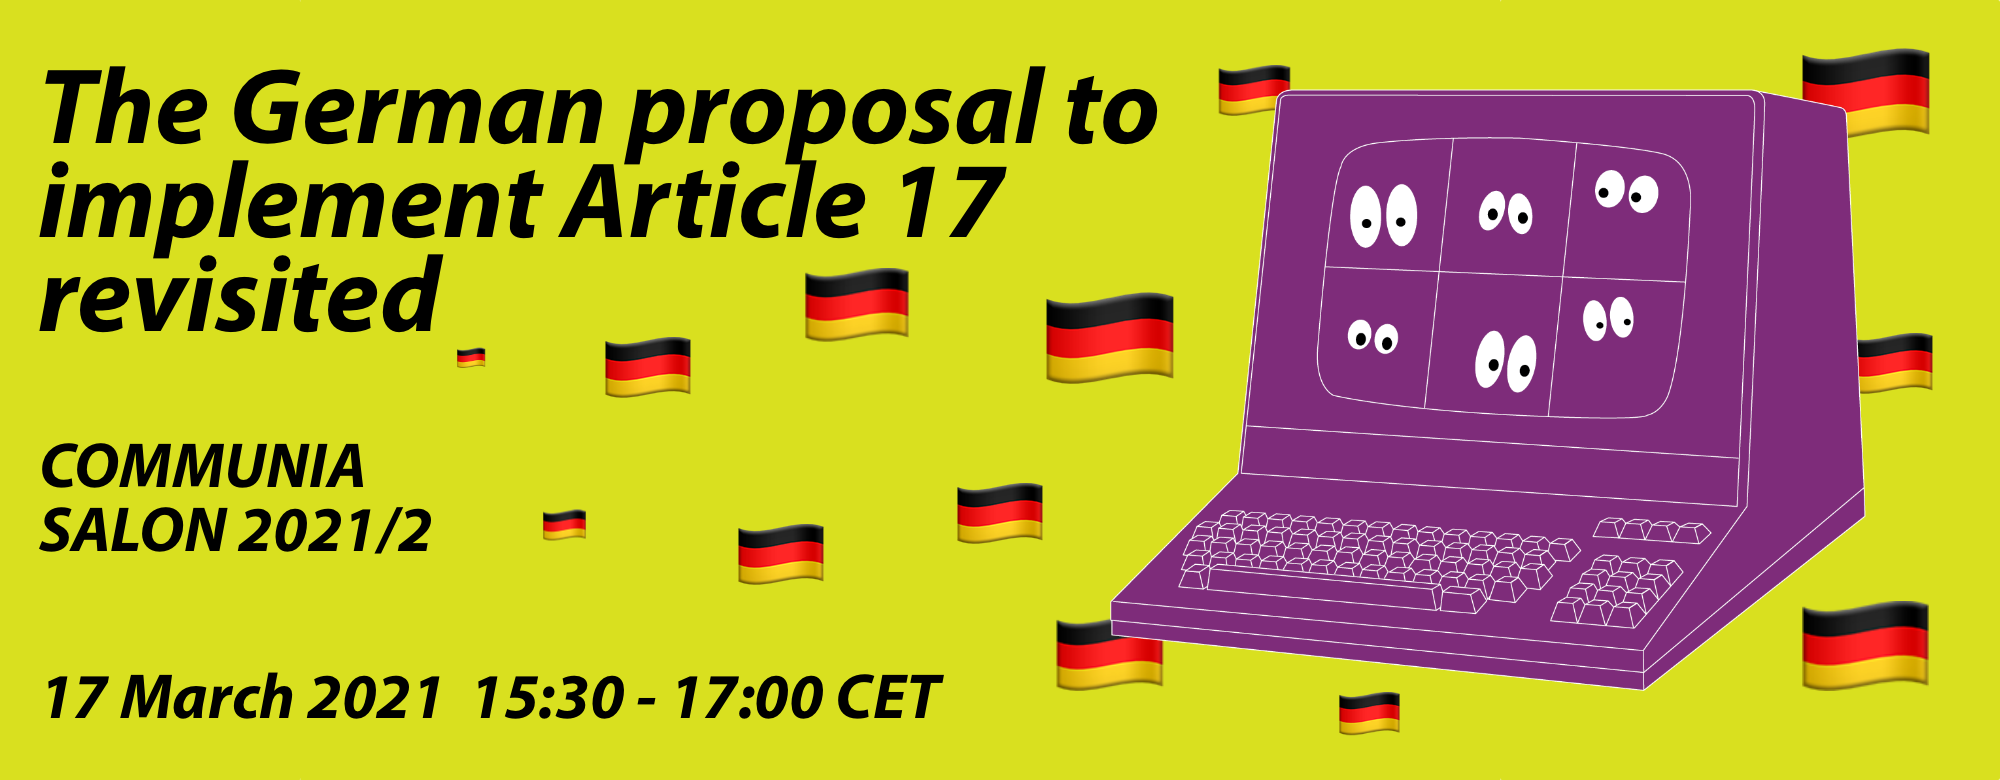 COMMUNIA Salon: The German proposal to implement Article 17 revised